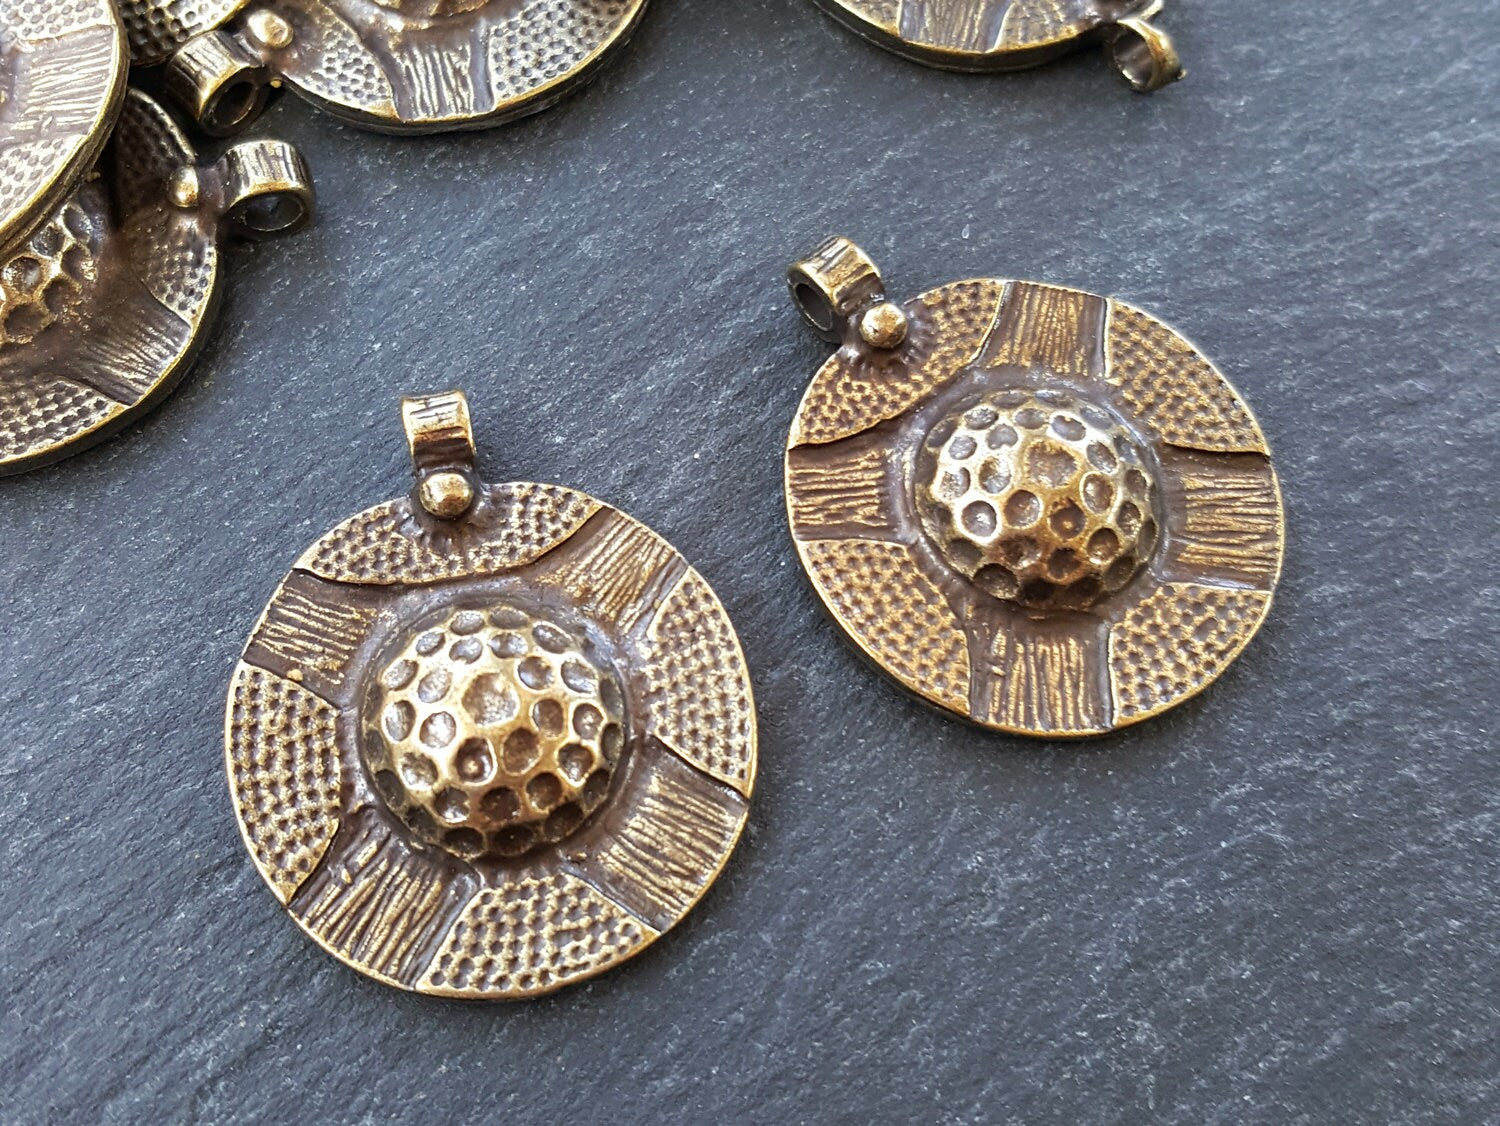 Round Tribal Honeycomb Necklace Pendants Antique Bronze Plated Turkish Jewelry Making Supplies Findings Components - 2pc